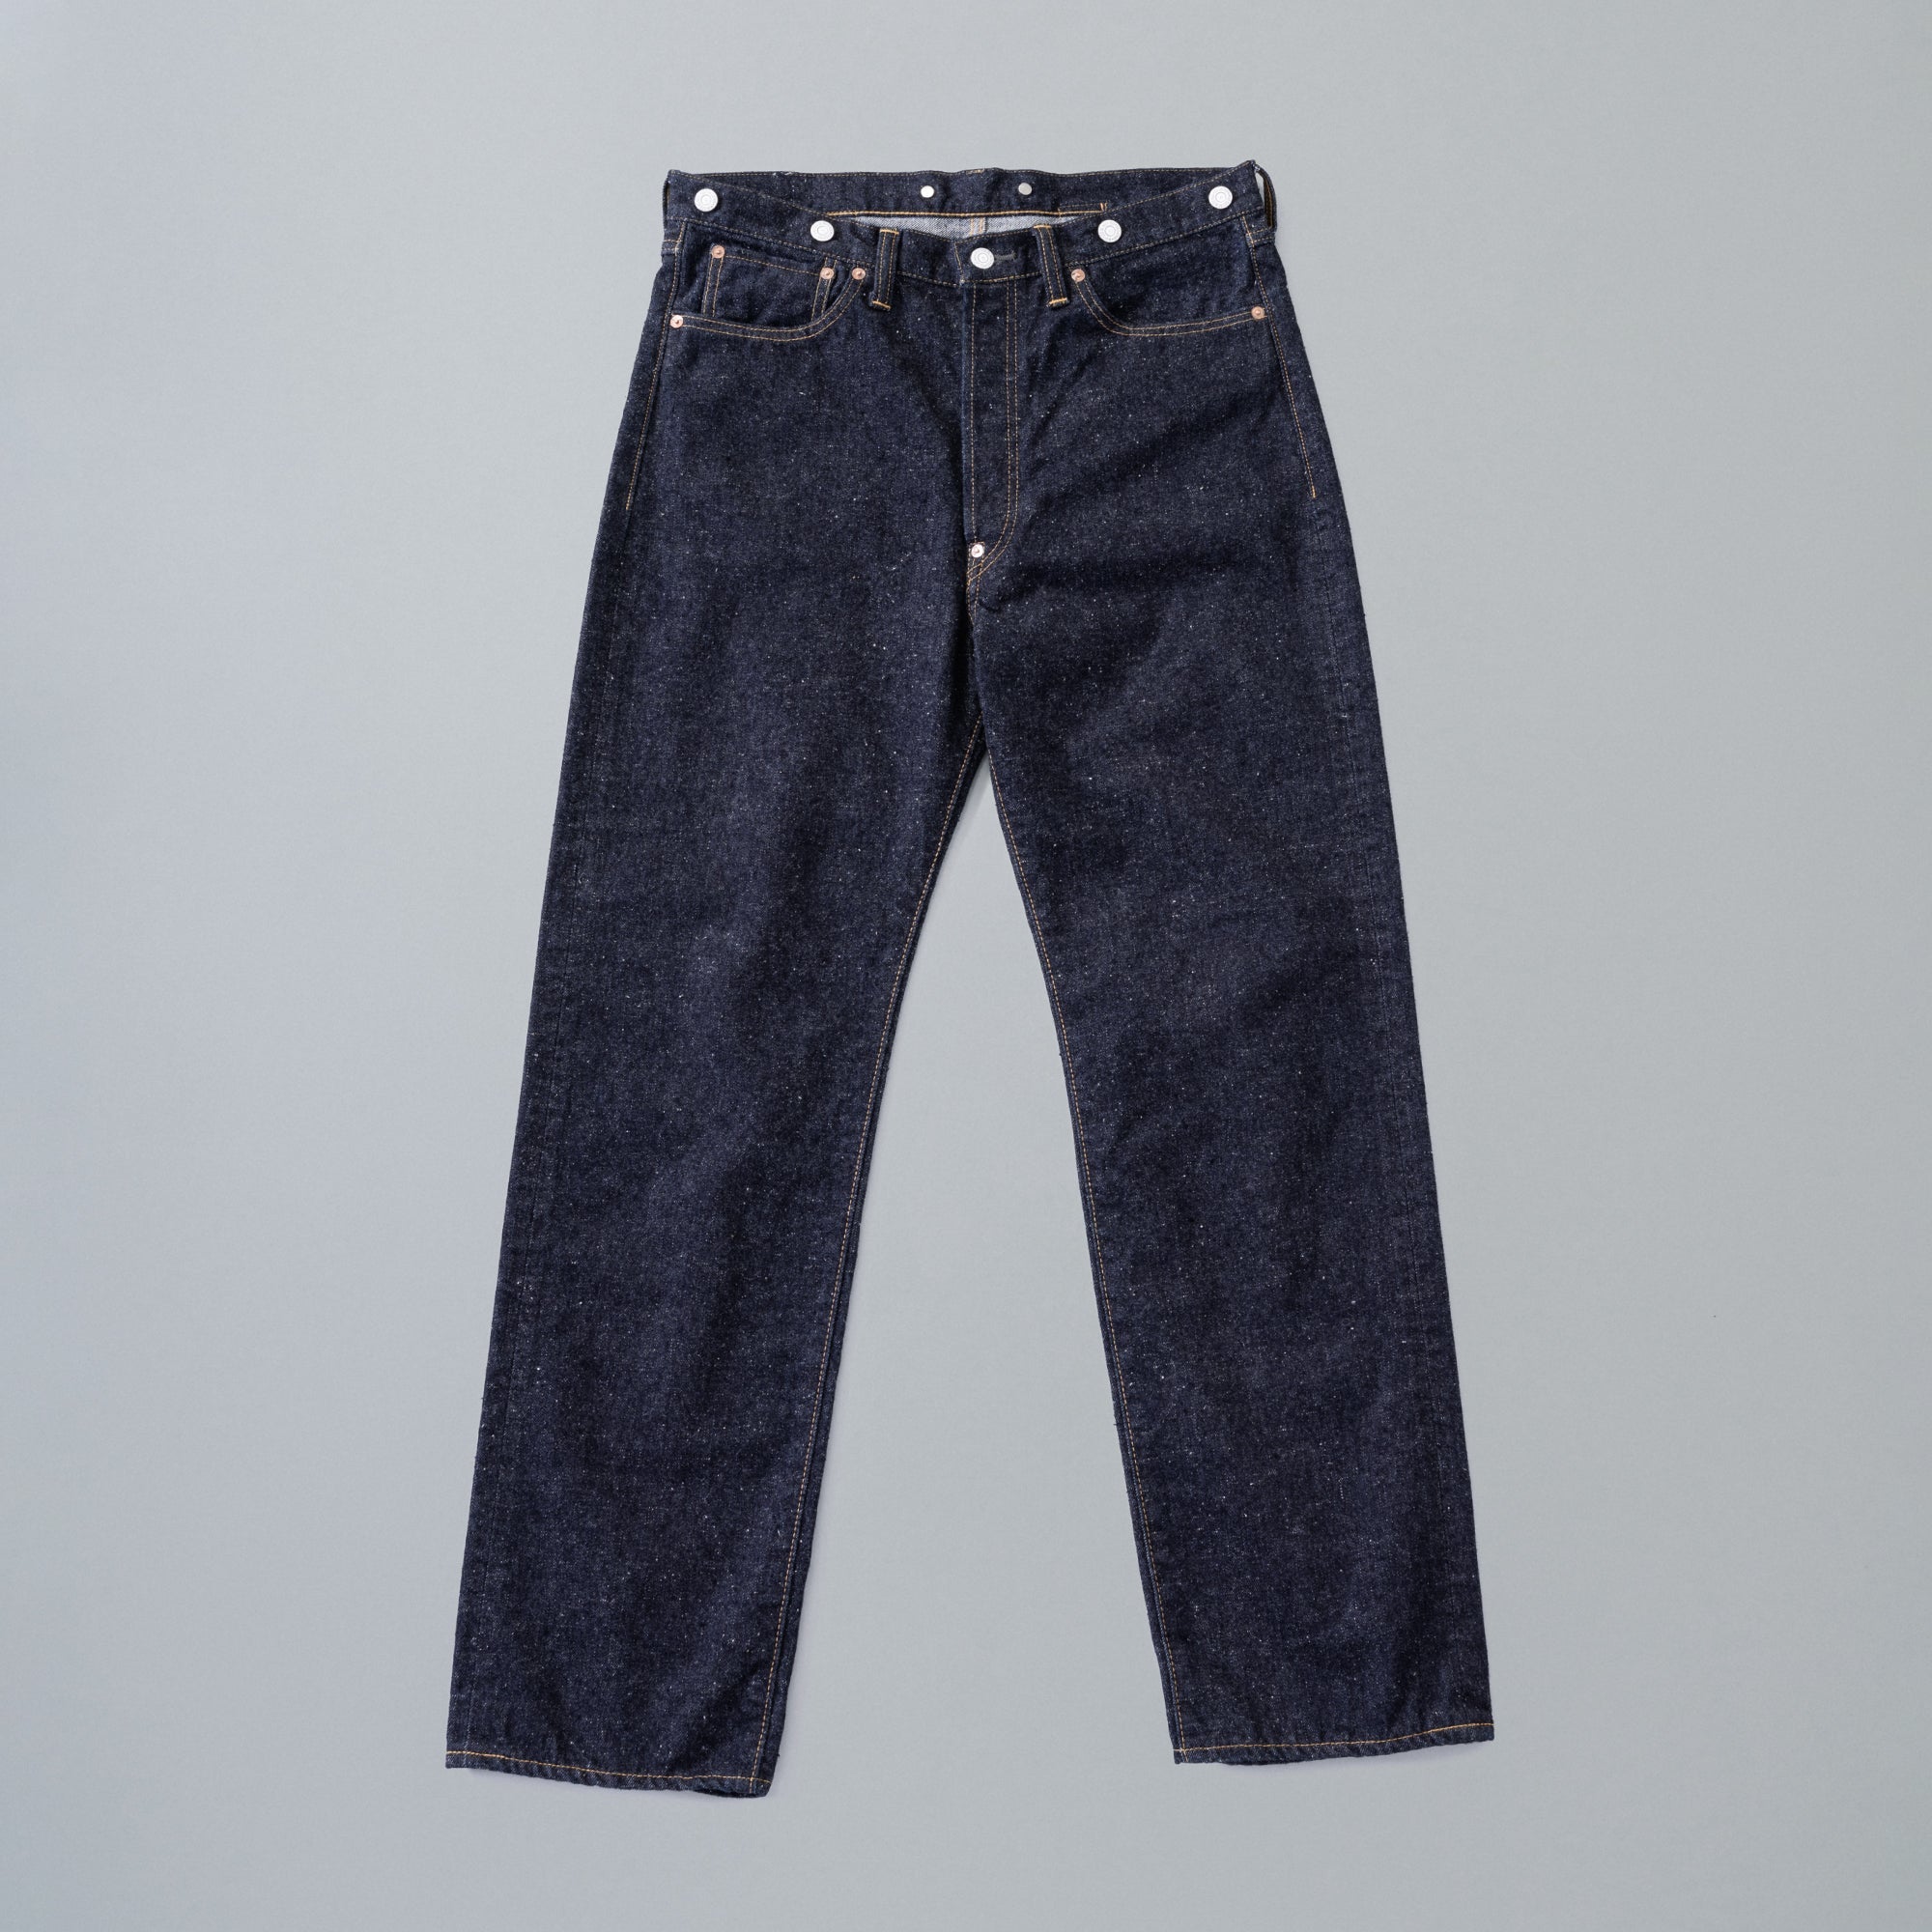 Size31New Manual 002 LV JEANS ISETANEXCLUSIVE